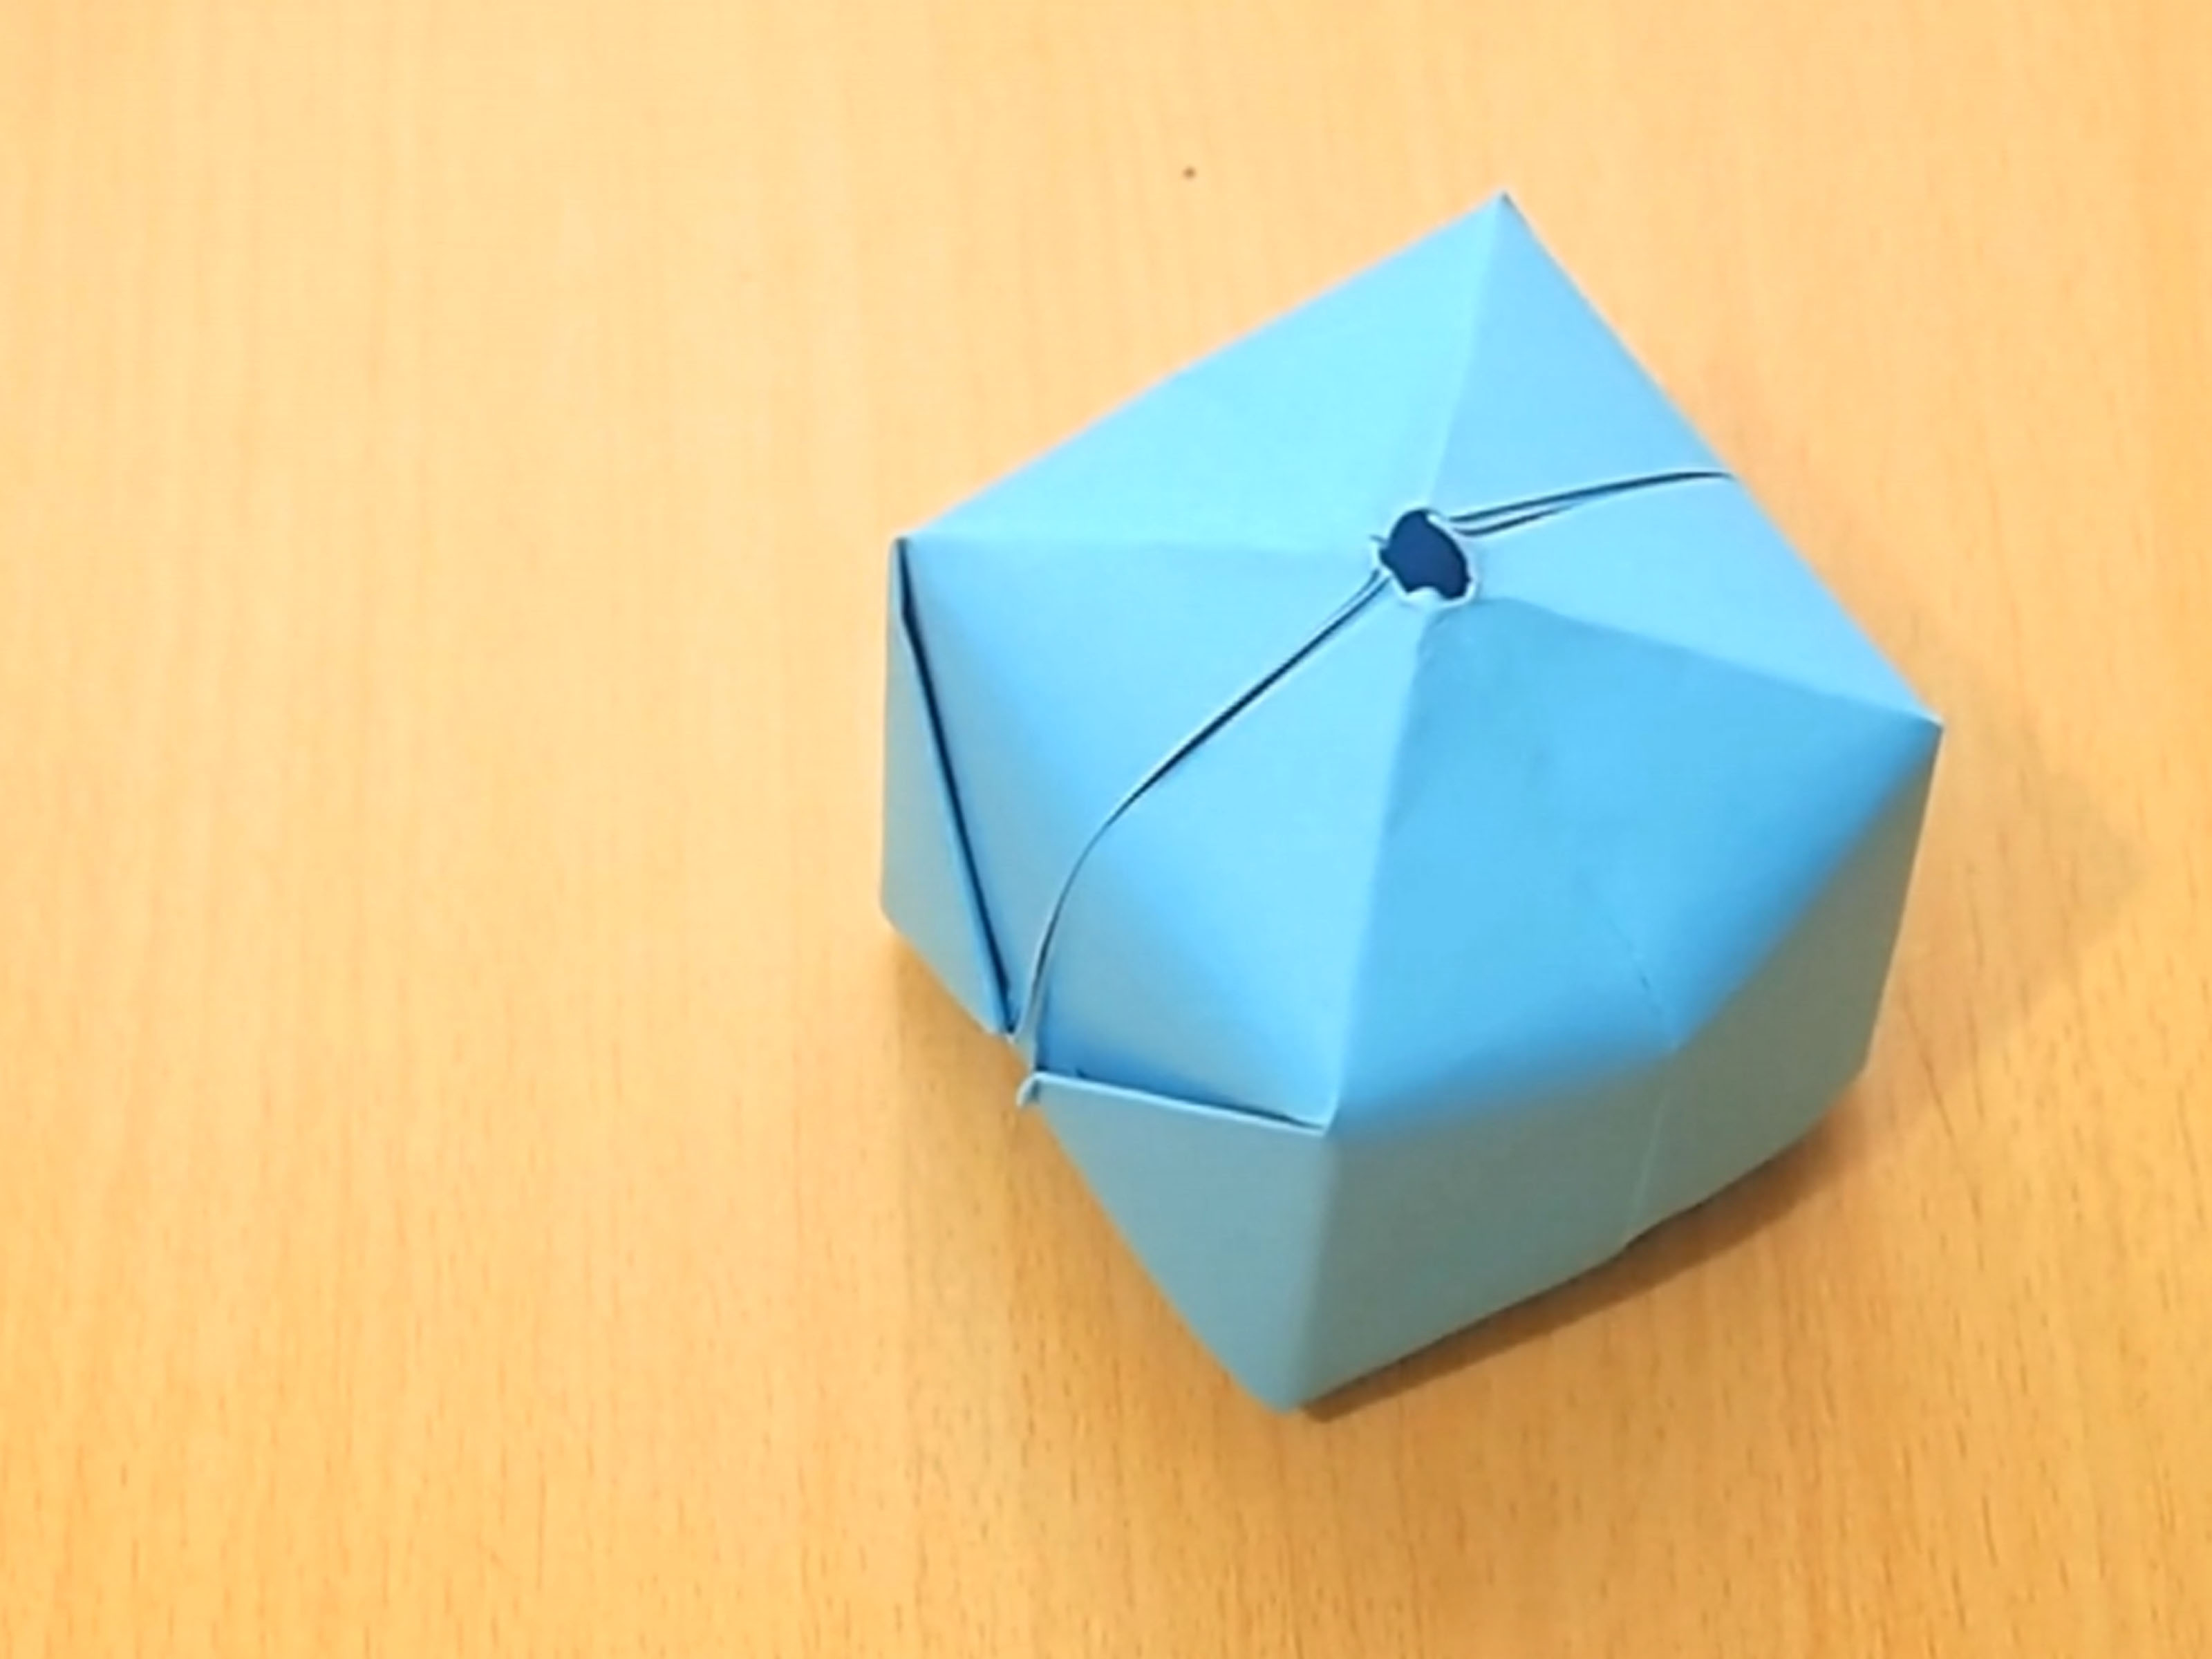 How To Make Origami Ball How To Make An Origami Balloon 8 Steps With Pictures Wikihow